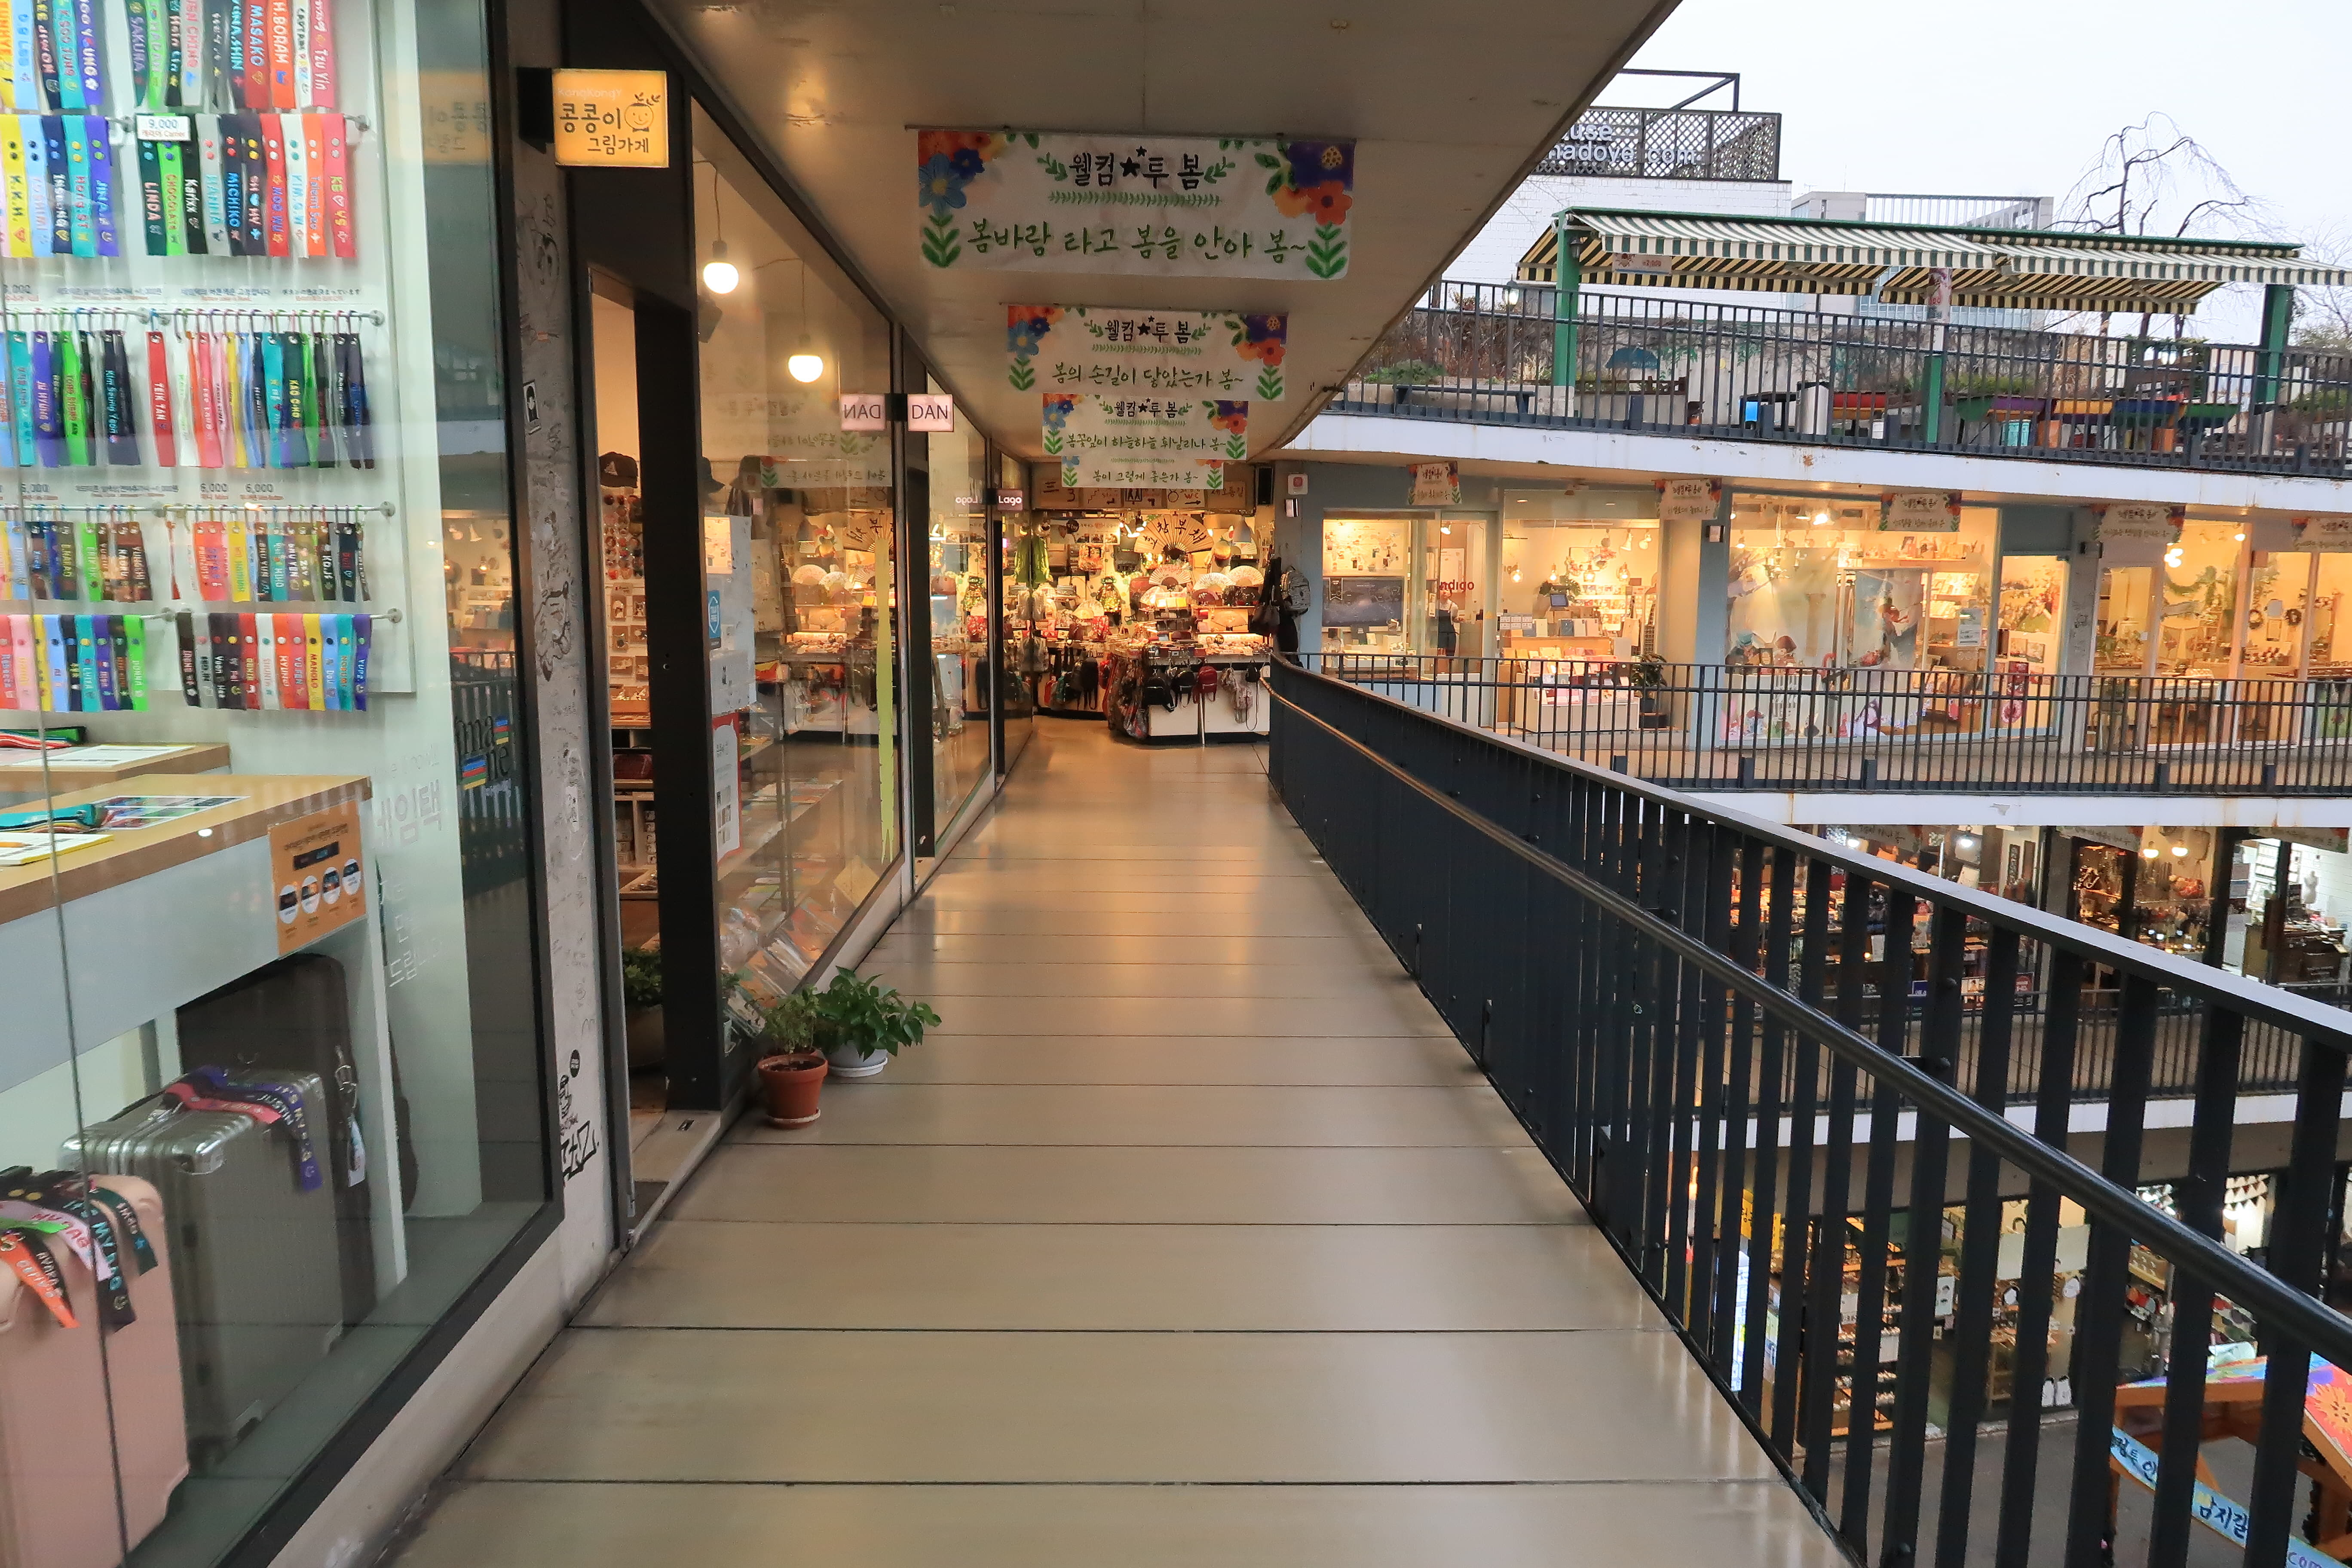 Entryway/ Movement route0 : A path with stores on the left side and the handrail on the right side